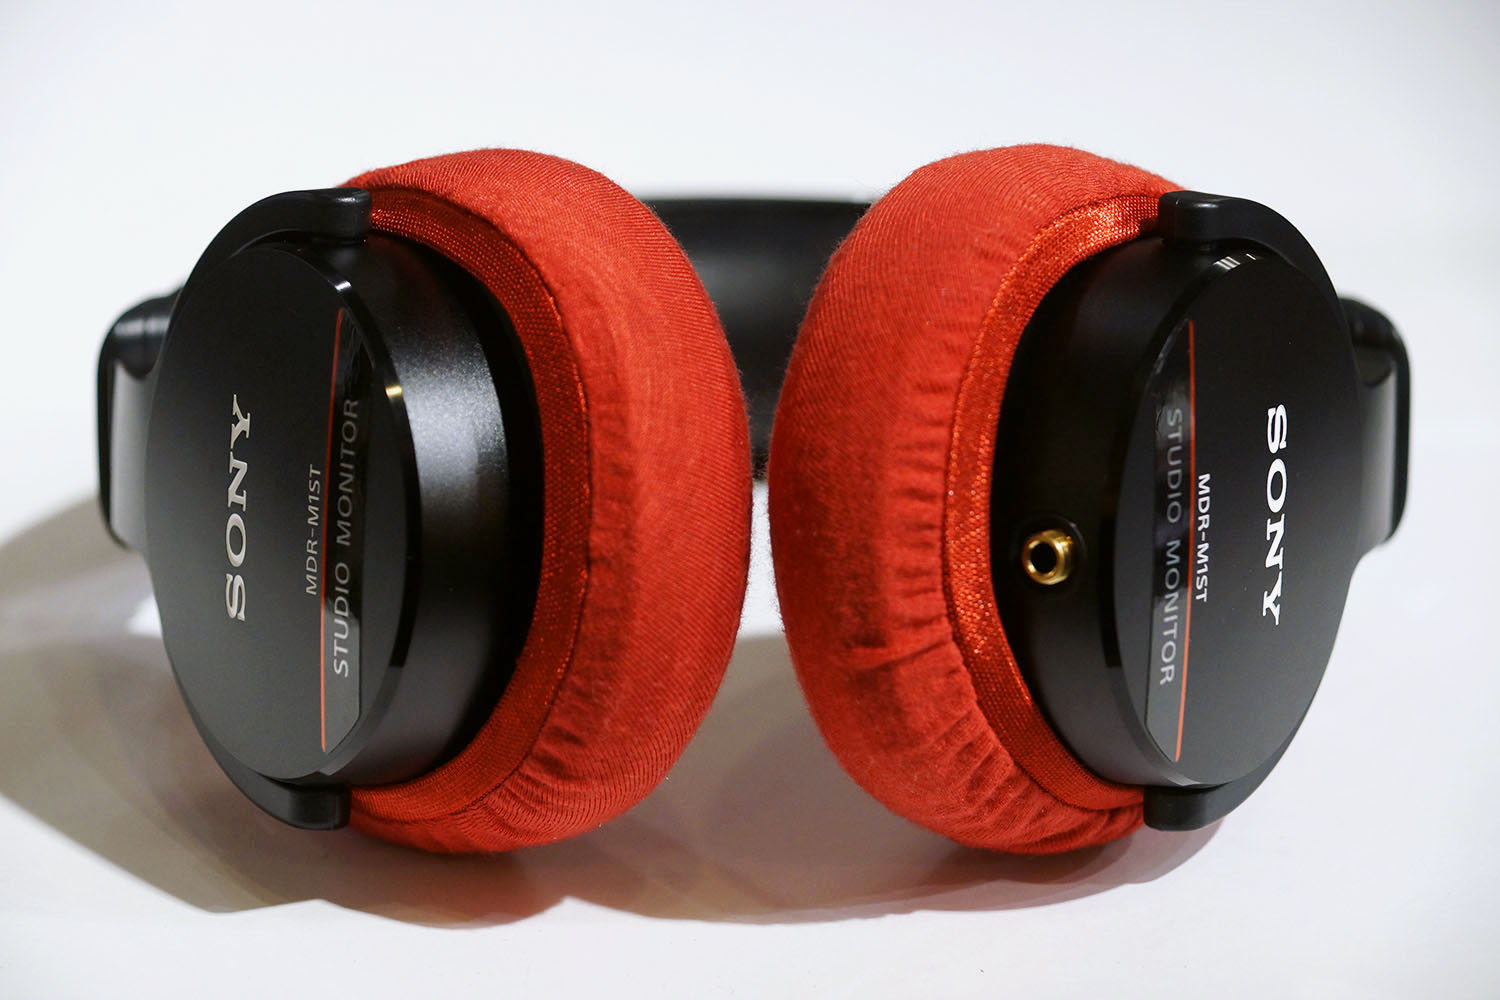 SONY MDR-M1ST earpad repair and protection: Super Stretch